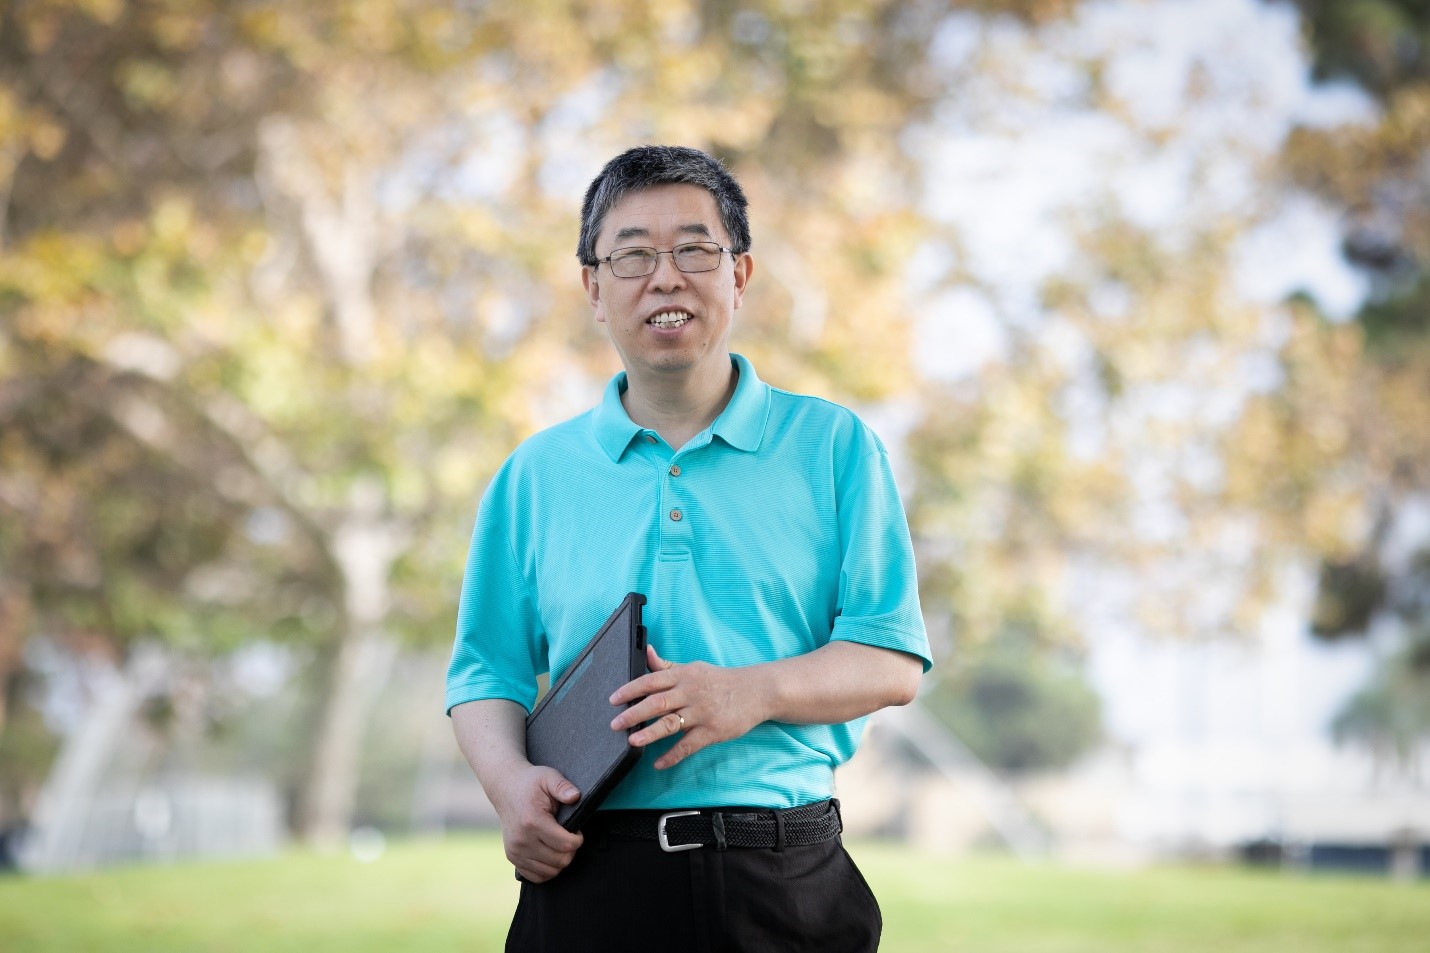 Image of Dr. Li standing outside in a park area, holding a laptop.